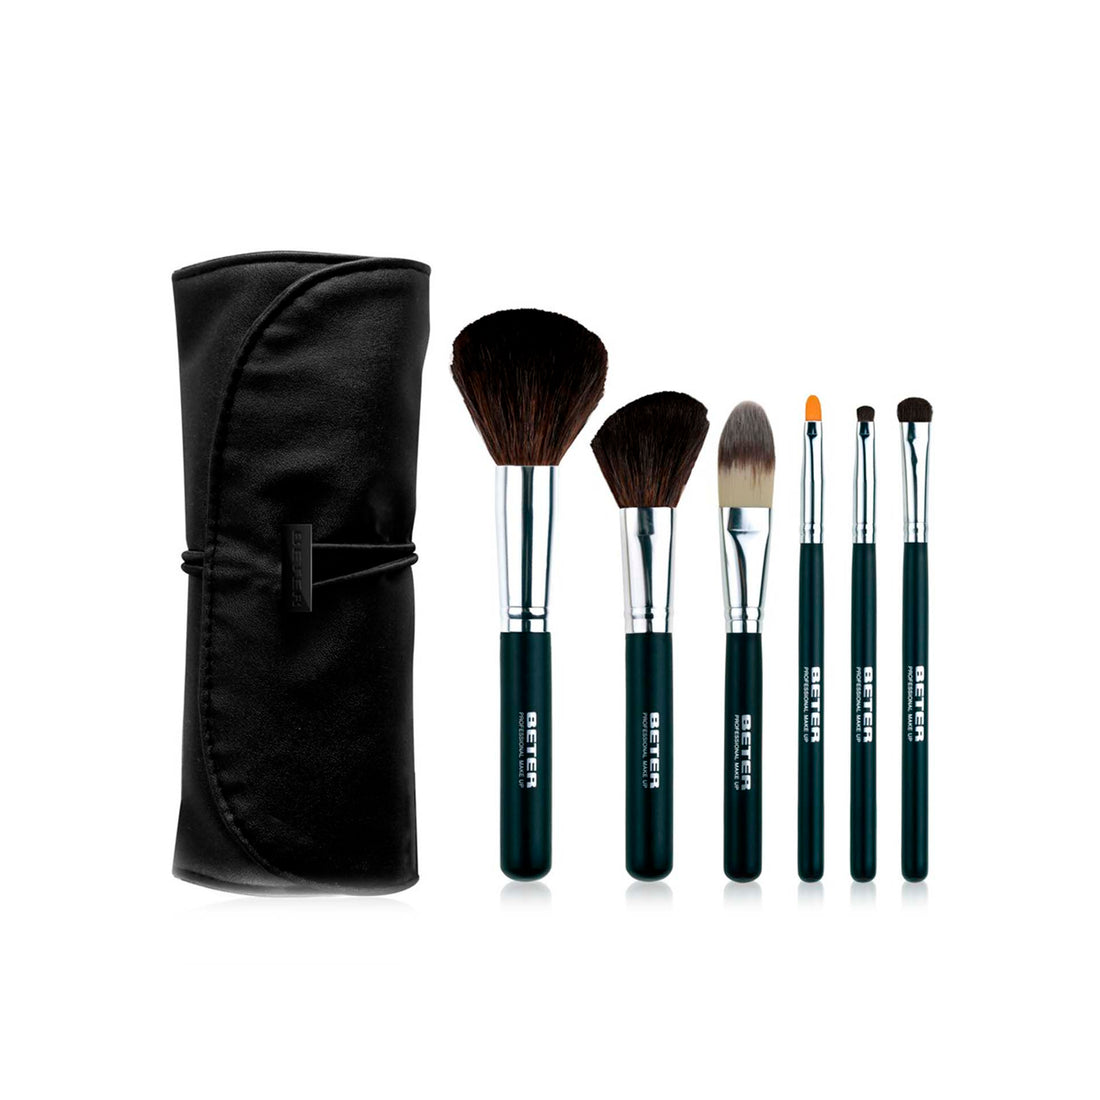 Beet - Professional Case With 6 Makeup Brushes